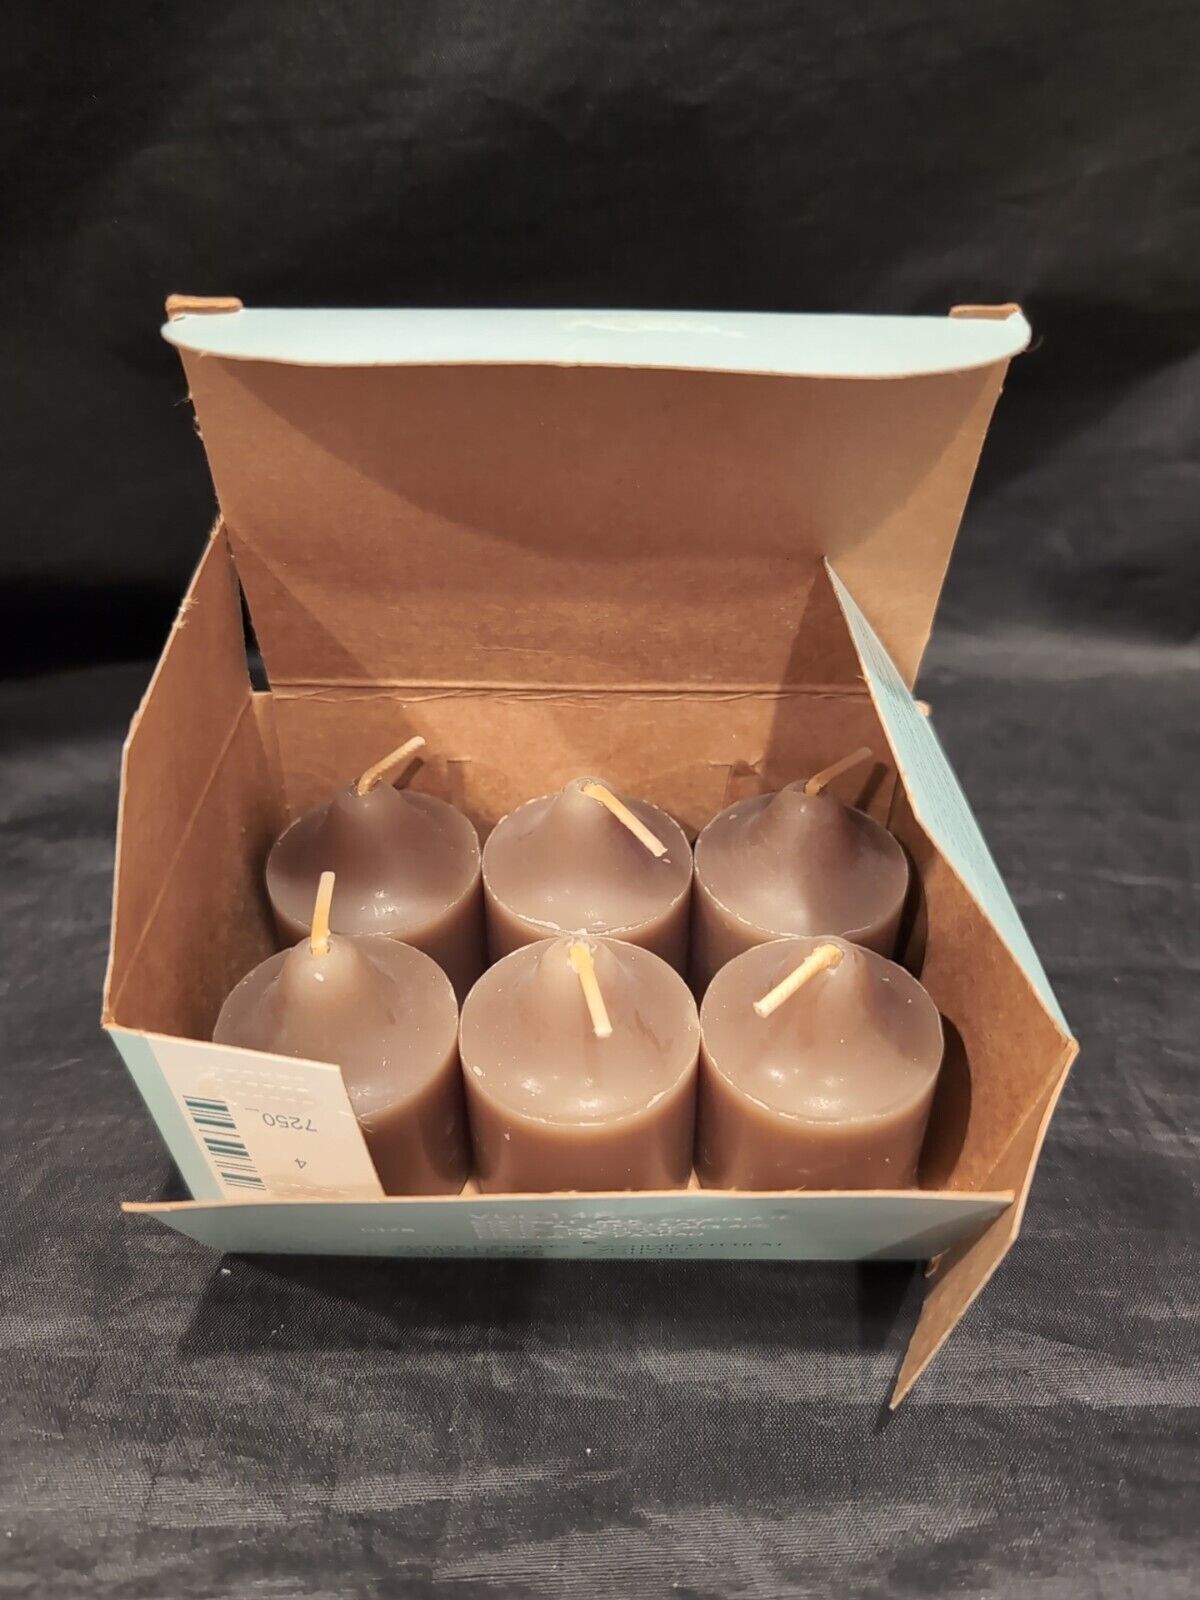 Partylite Coconut Milk Chocolate V06448 Retired Votive Candles with Box 6 Count